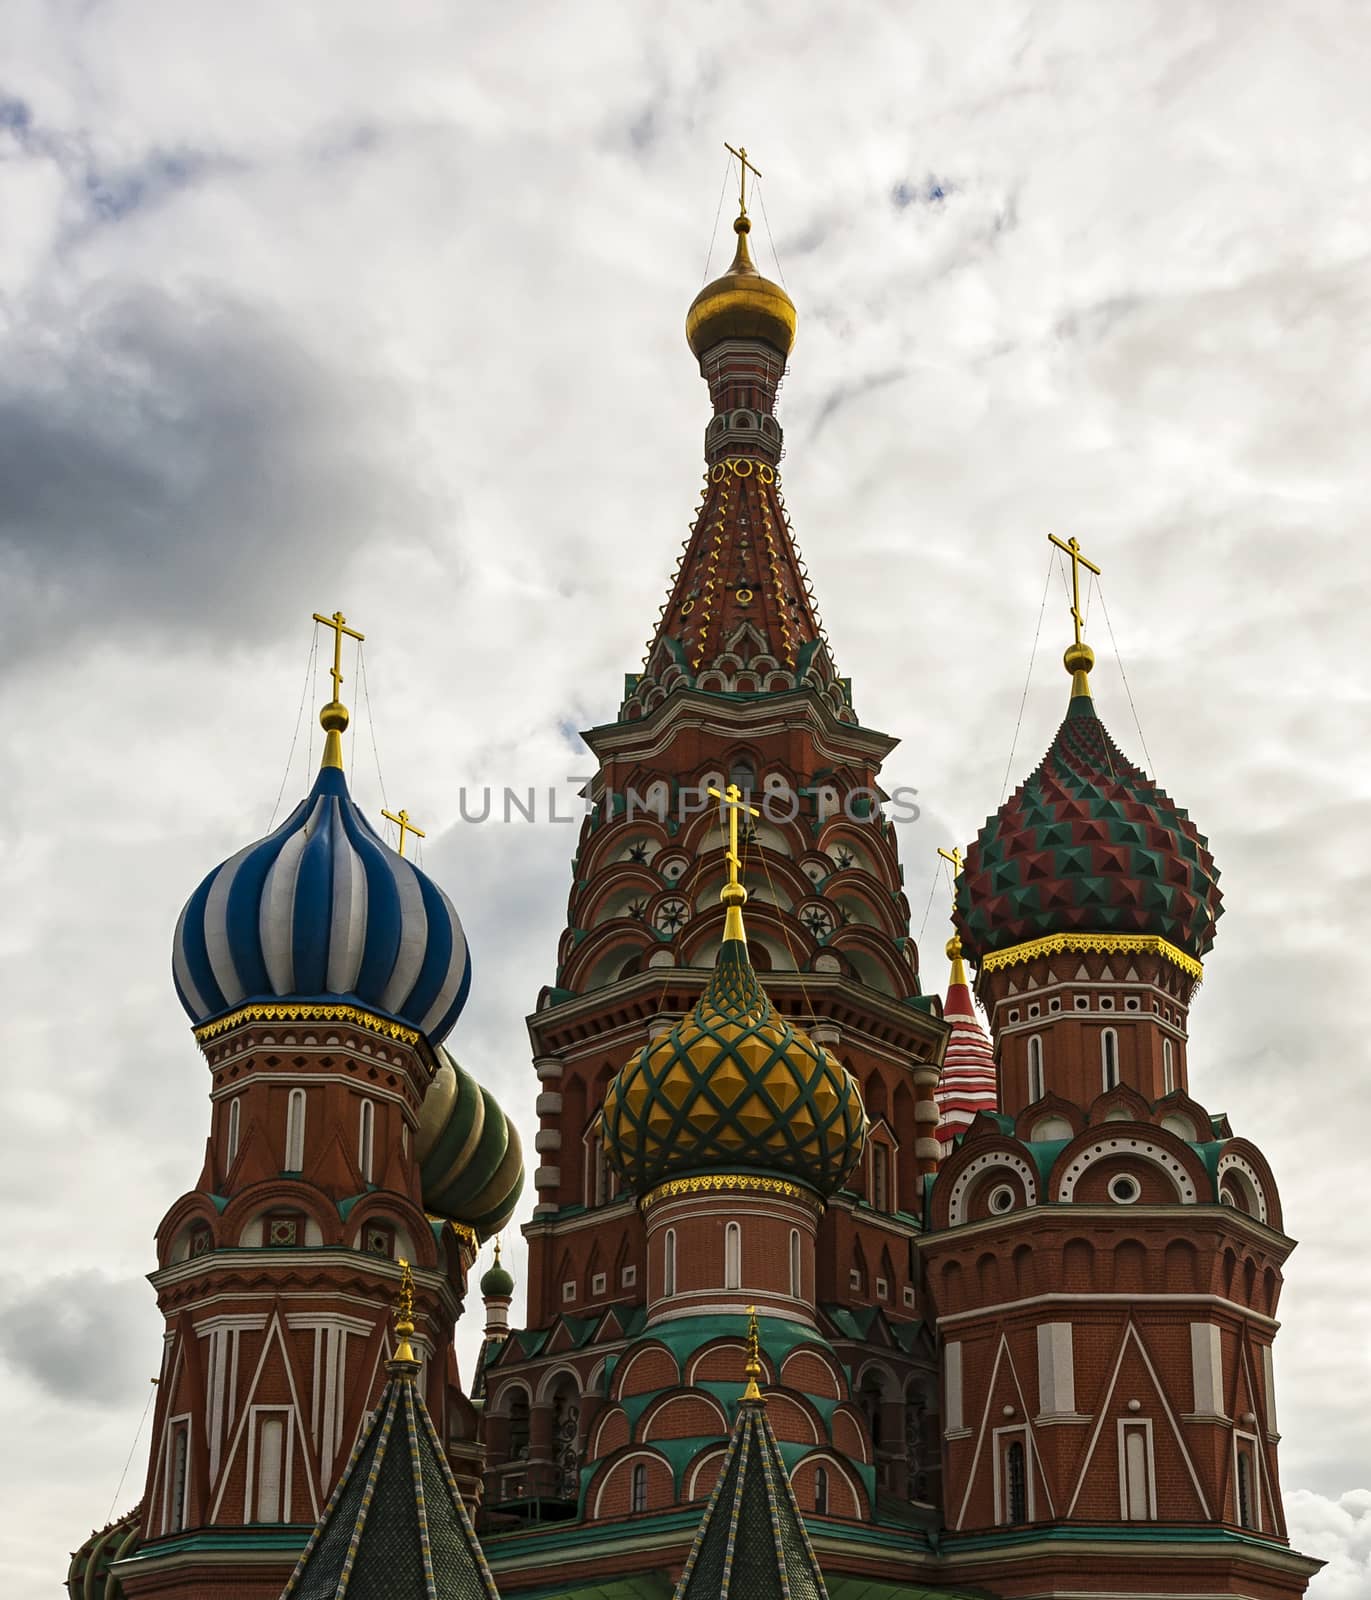 Dome of the Cathedral of Vasily the blessed on red square (Mosco by Grommik